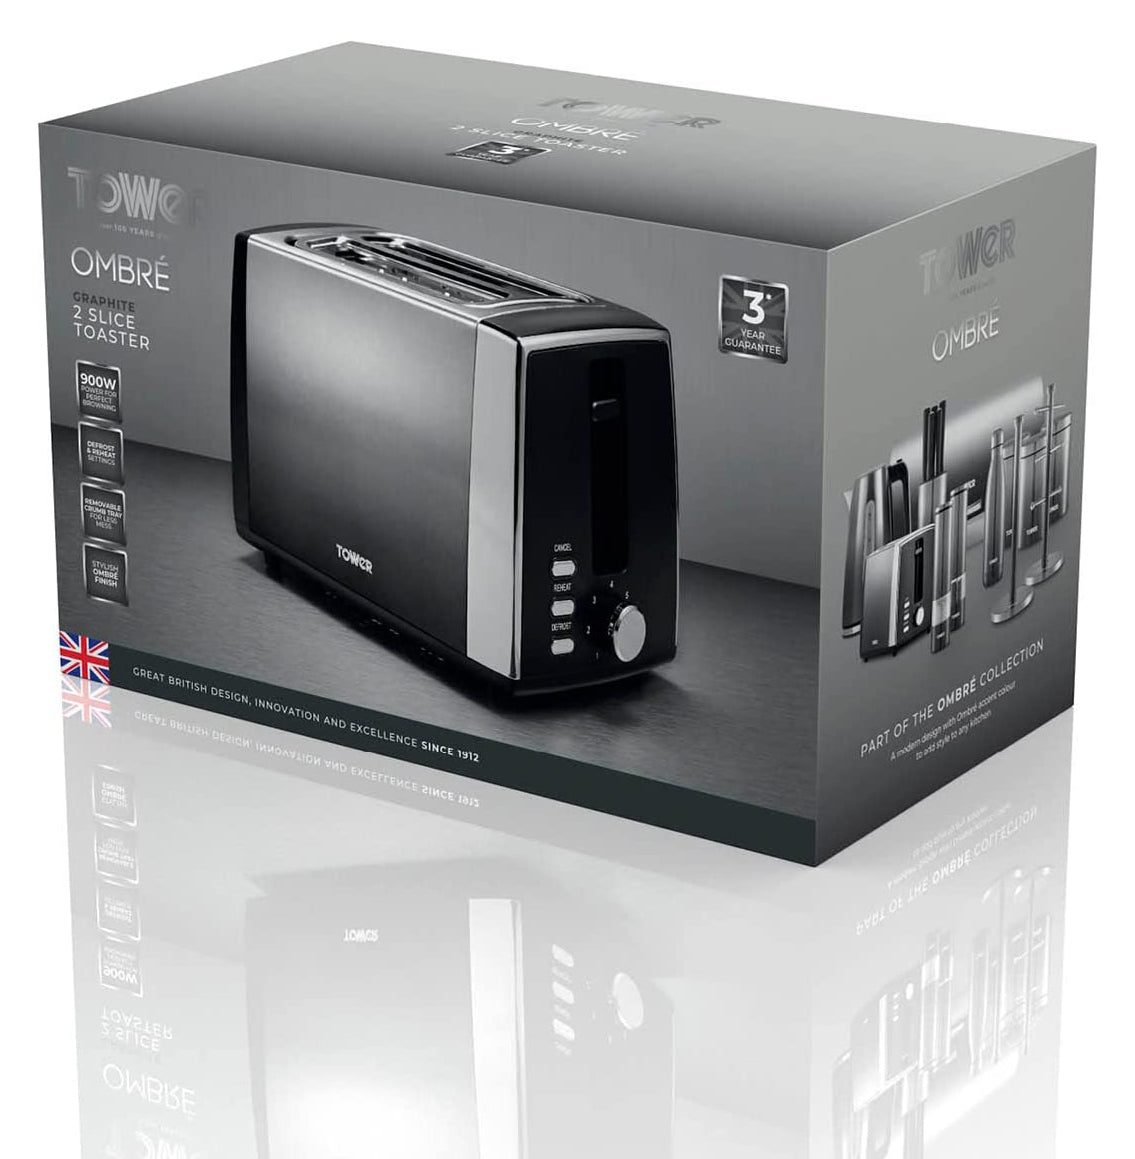 Tower Electric Grey 2 Slice Toaster Infinity Ombre Graphite 900W (T20038GRP)